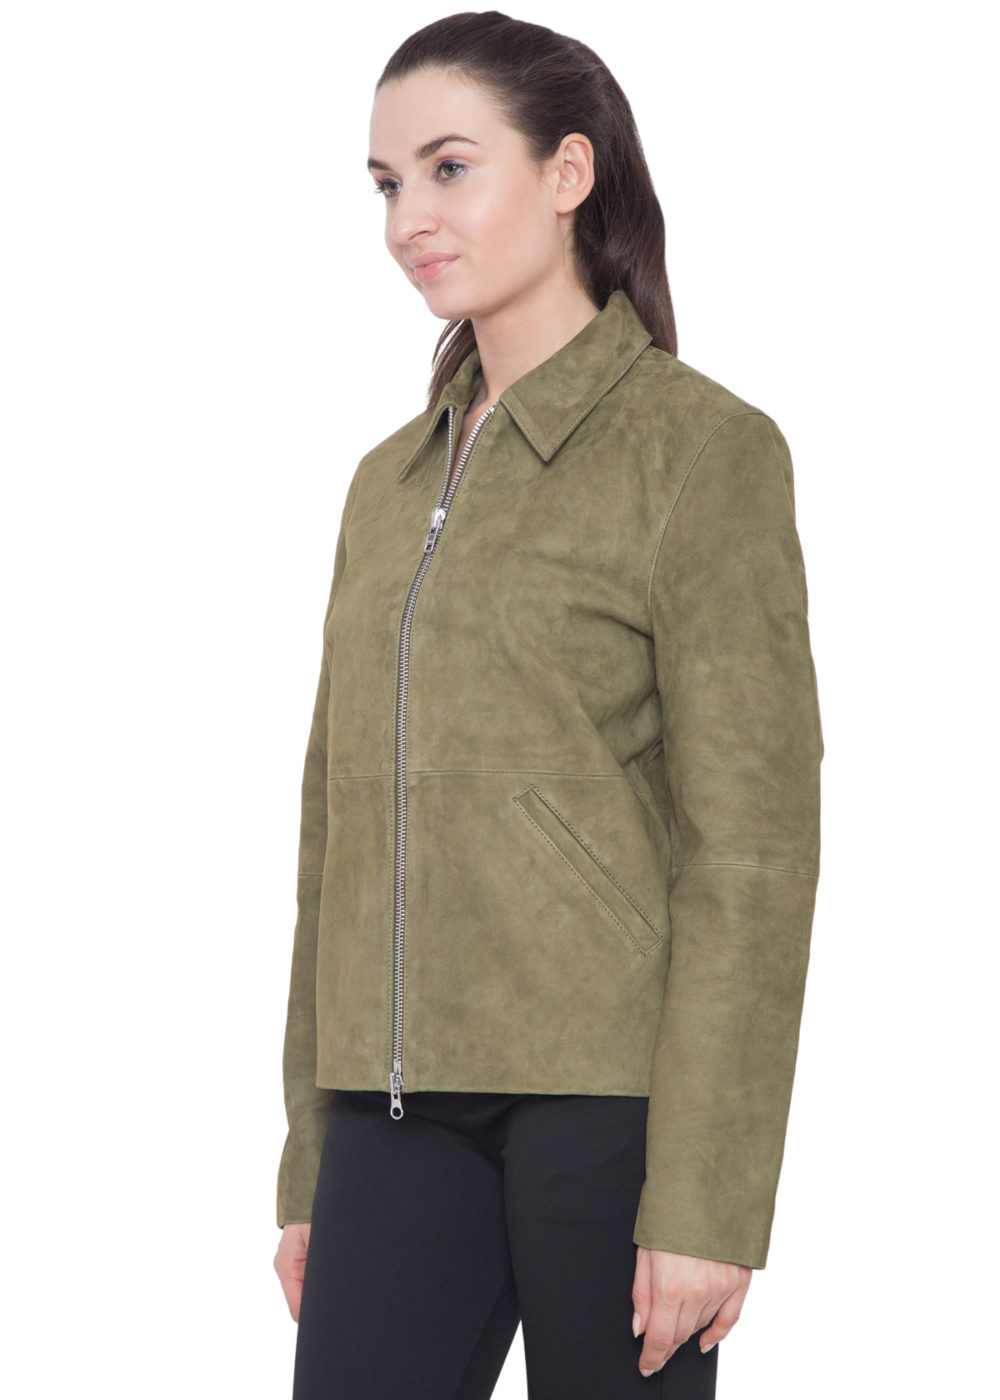 OLIVE GREEN SUEDE LEATHER JACKET – WOMEN – Caliber Apparels